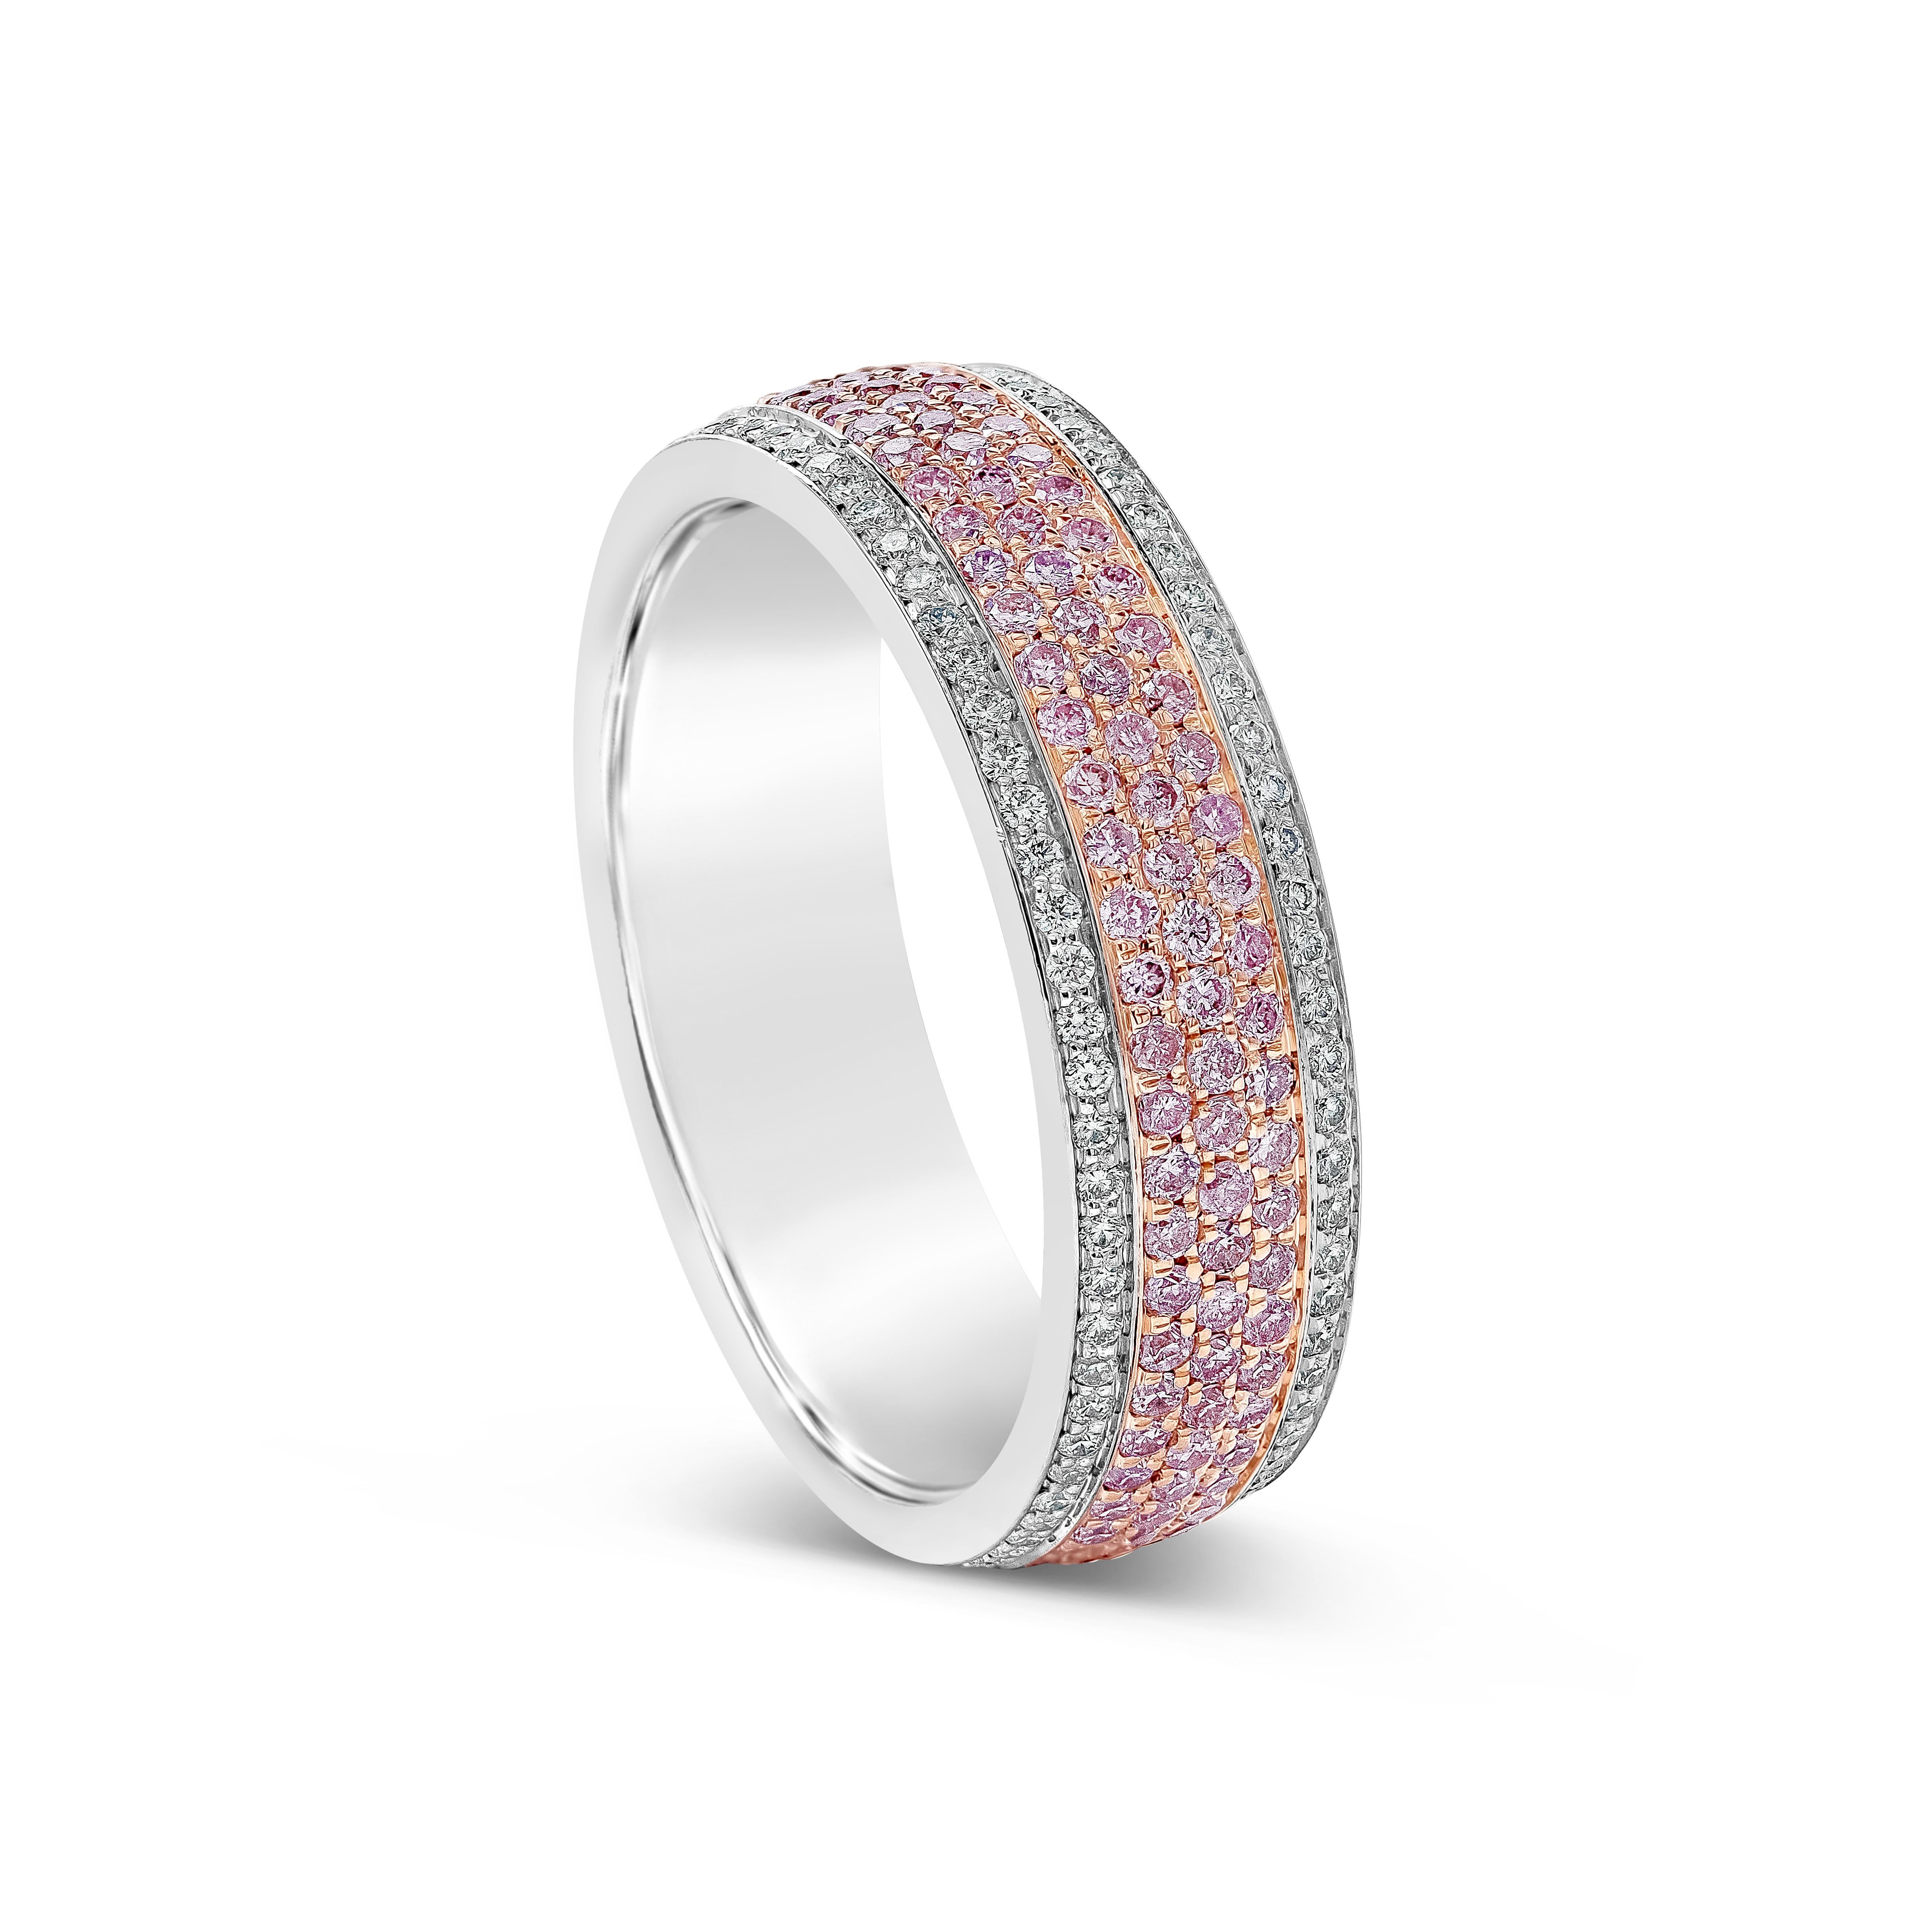 A beautiful and chic wedding band style showcasing three rows of vibrant pink diamonds, micro-pave set in brilliant white diamonds. Made in 14k rose gold and platinum. Pink diamonds weigh 0.85 carats total; white diamonds weigh 0.30 carats